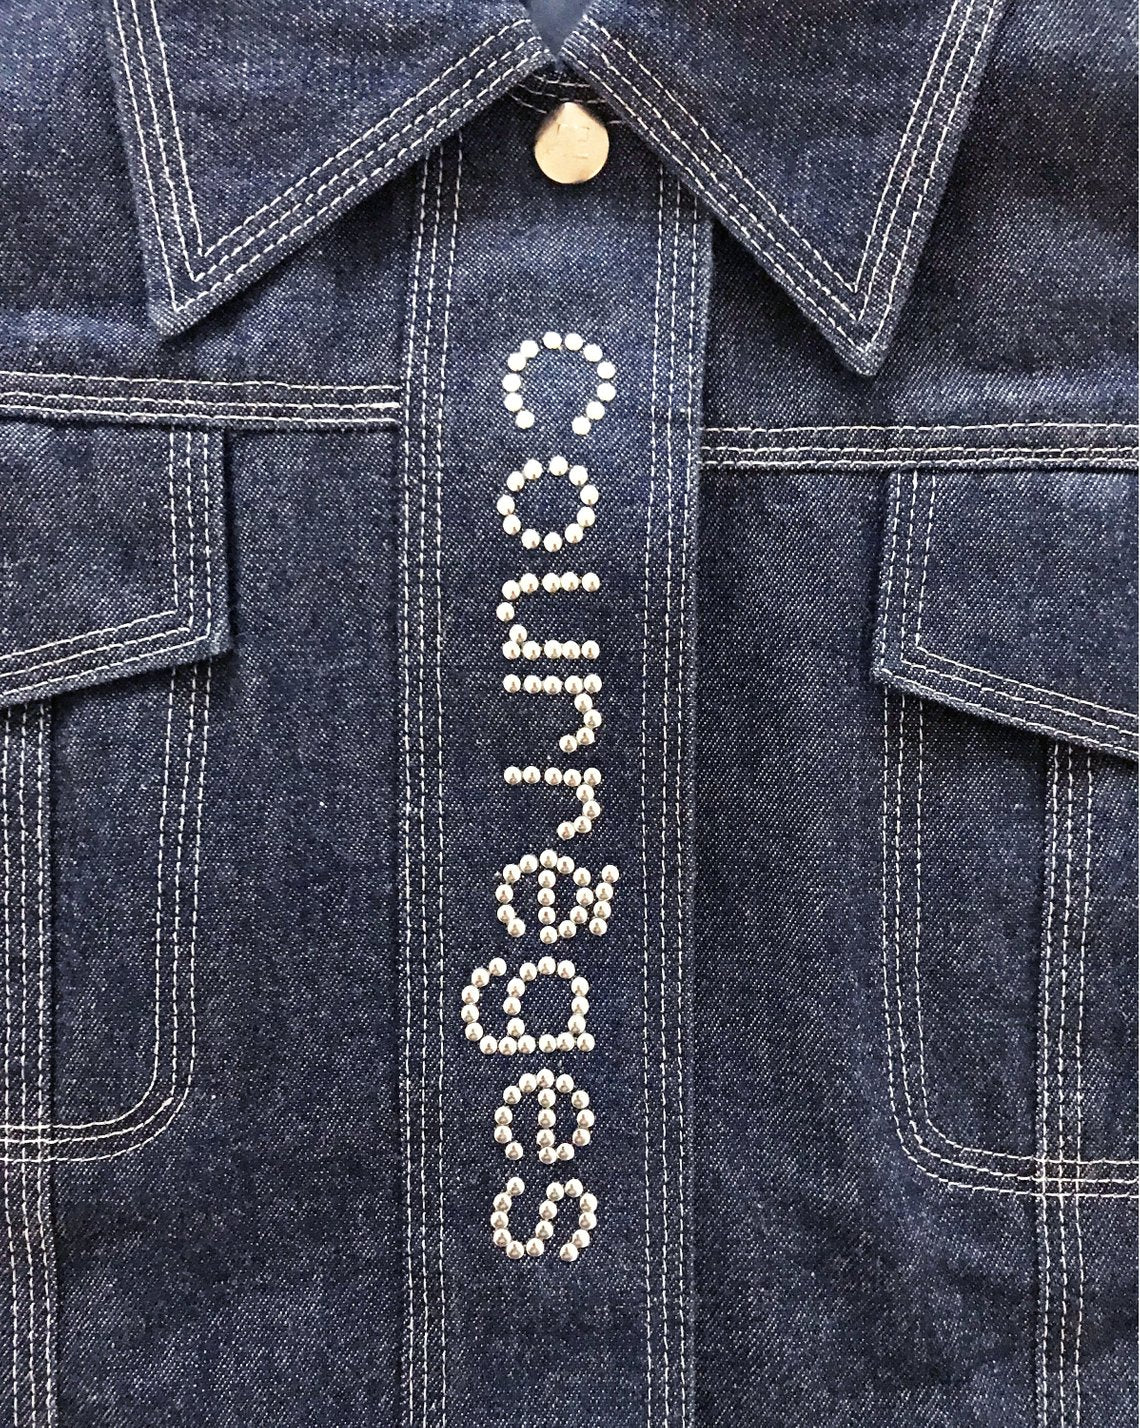 Fruit Vintage Courreges denim logo dress. Features a large silver logo at front, top stitching and logo buttons. Can also be fully unbuttoned and worn as coat/duster jacket.